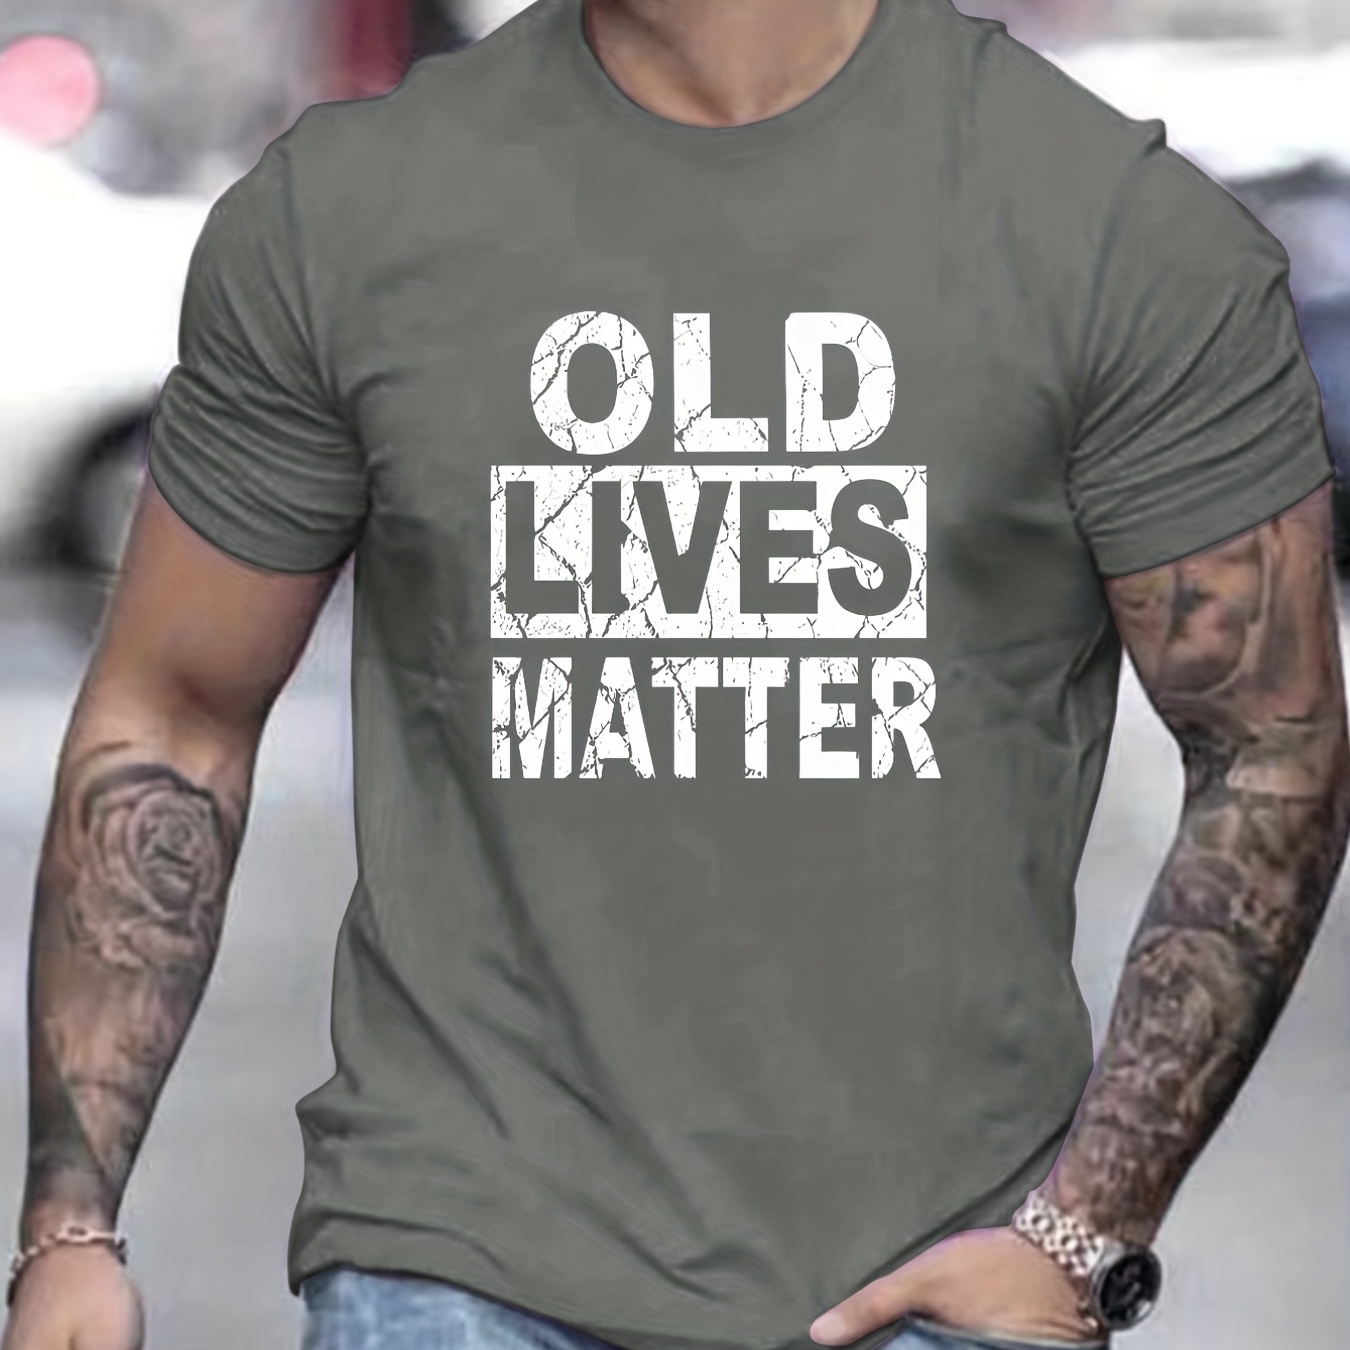 

Funny Slogan Old Lives Matter Pattern Print Men's T-shirt, Graphic Tee Men's Summer Clothes, Men's Outfits